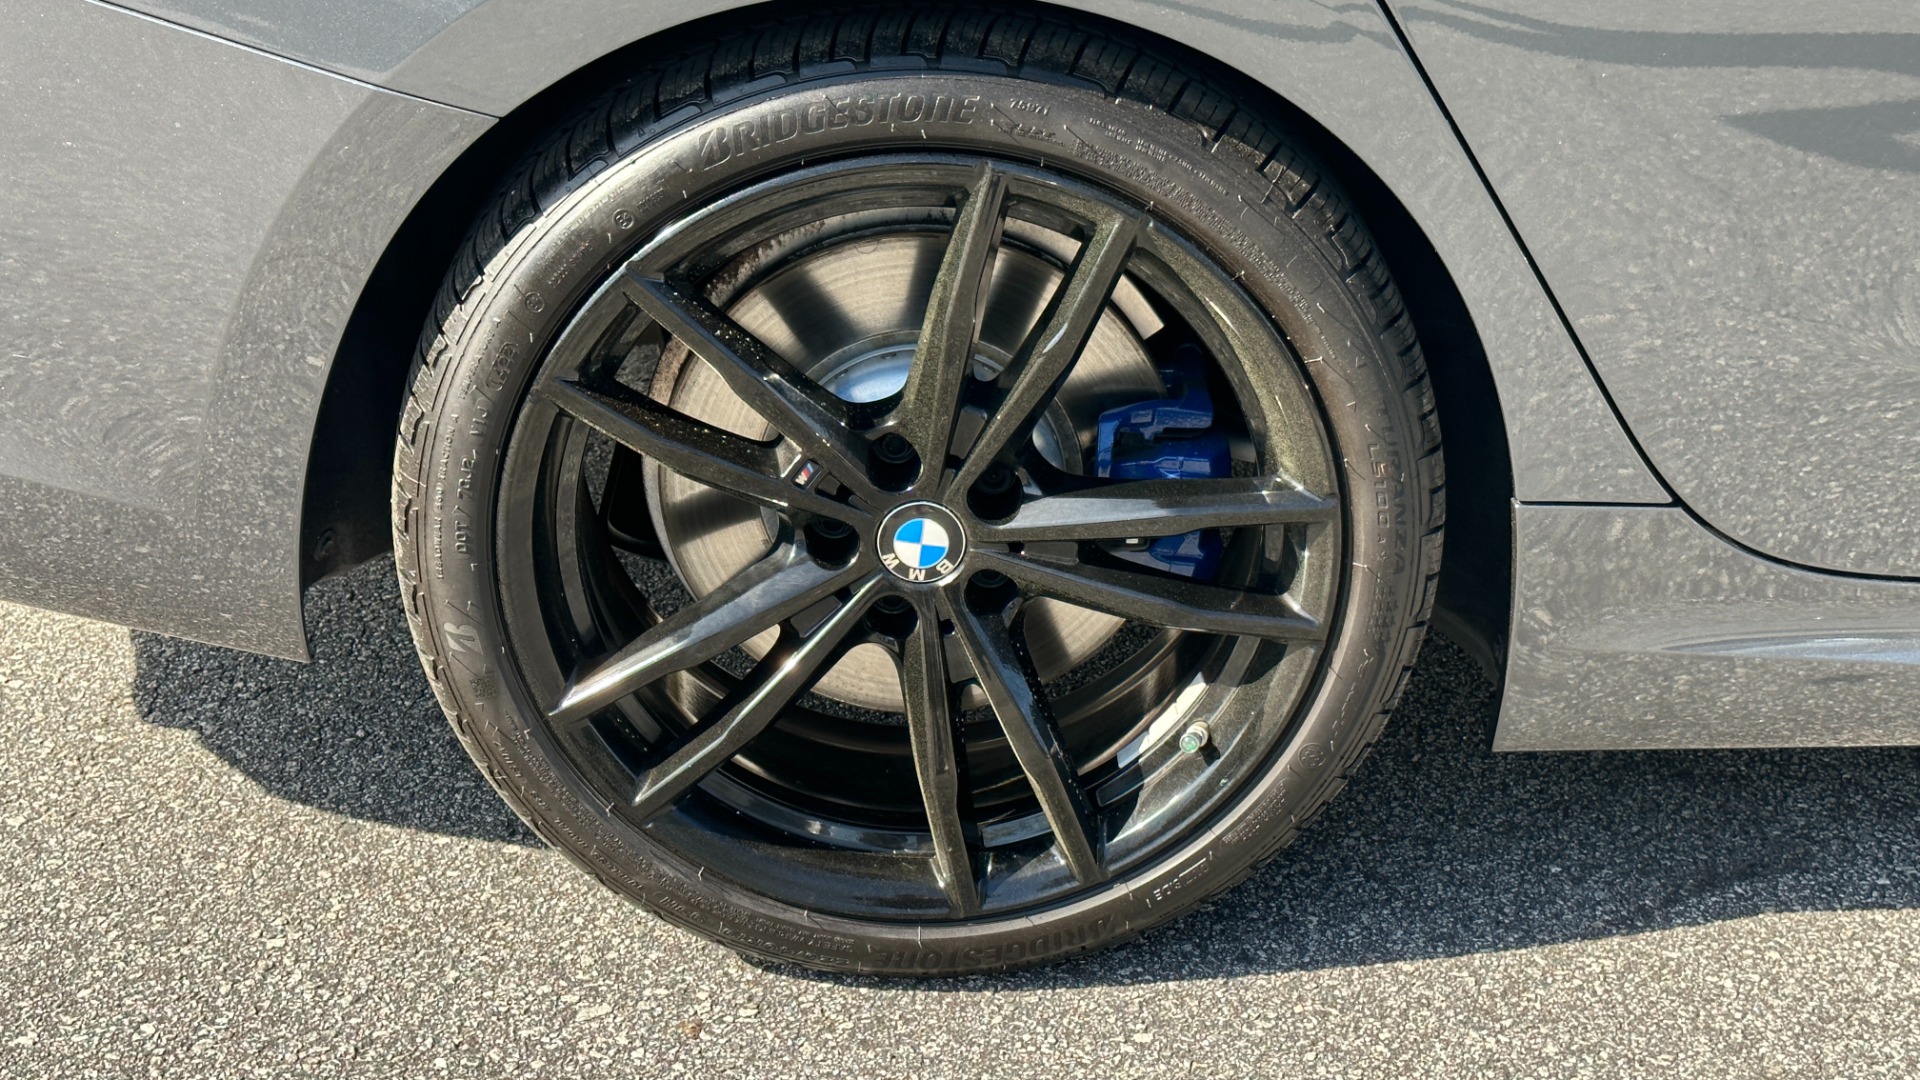 Used 2020 BMW 3 Series M340i / 19IN WHEELS / DRIVER ASSIST / HEATED SEATS / PARKING SENSORS for sale $45,995 at Formula Imports in Charlotte NC 28227 45